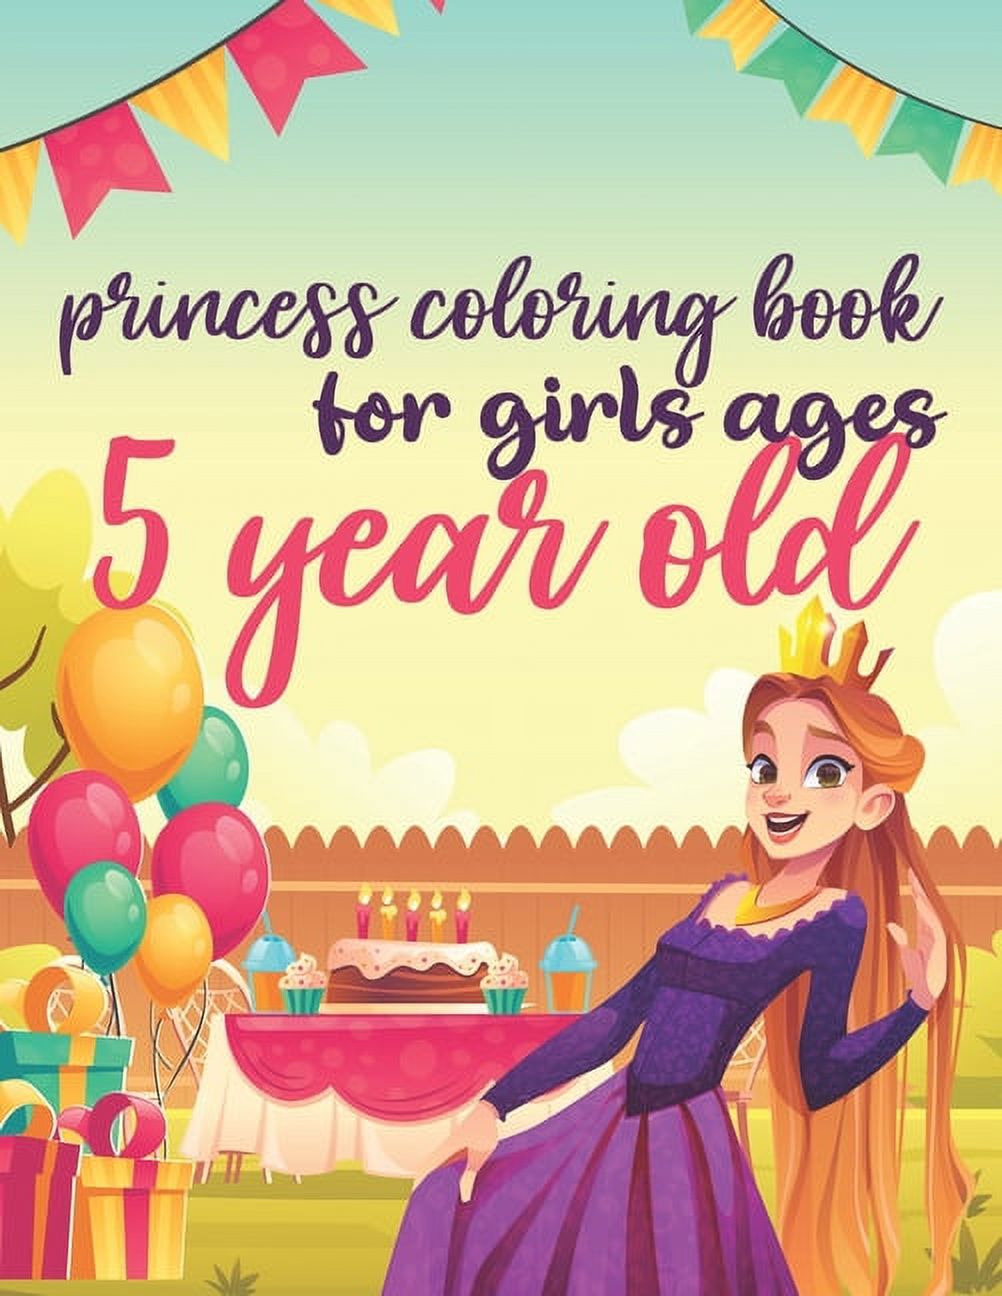 princess coloring book for girls ages 5 year old : Cute Princess Coloring Book for girls, Princess Coloring Activity Book for Toddlers, gift For Little Girls Who Love Princesses (Paperback) - image 1 of 1